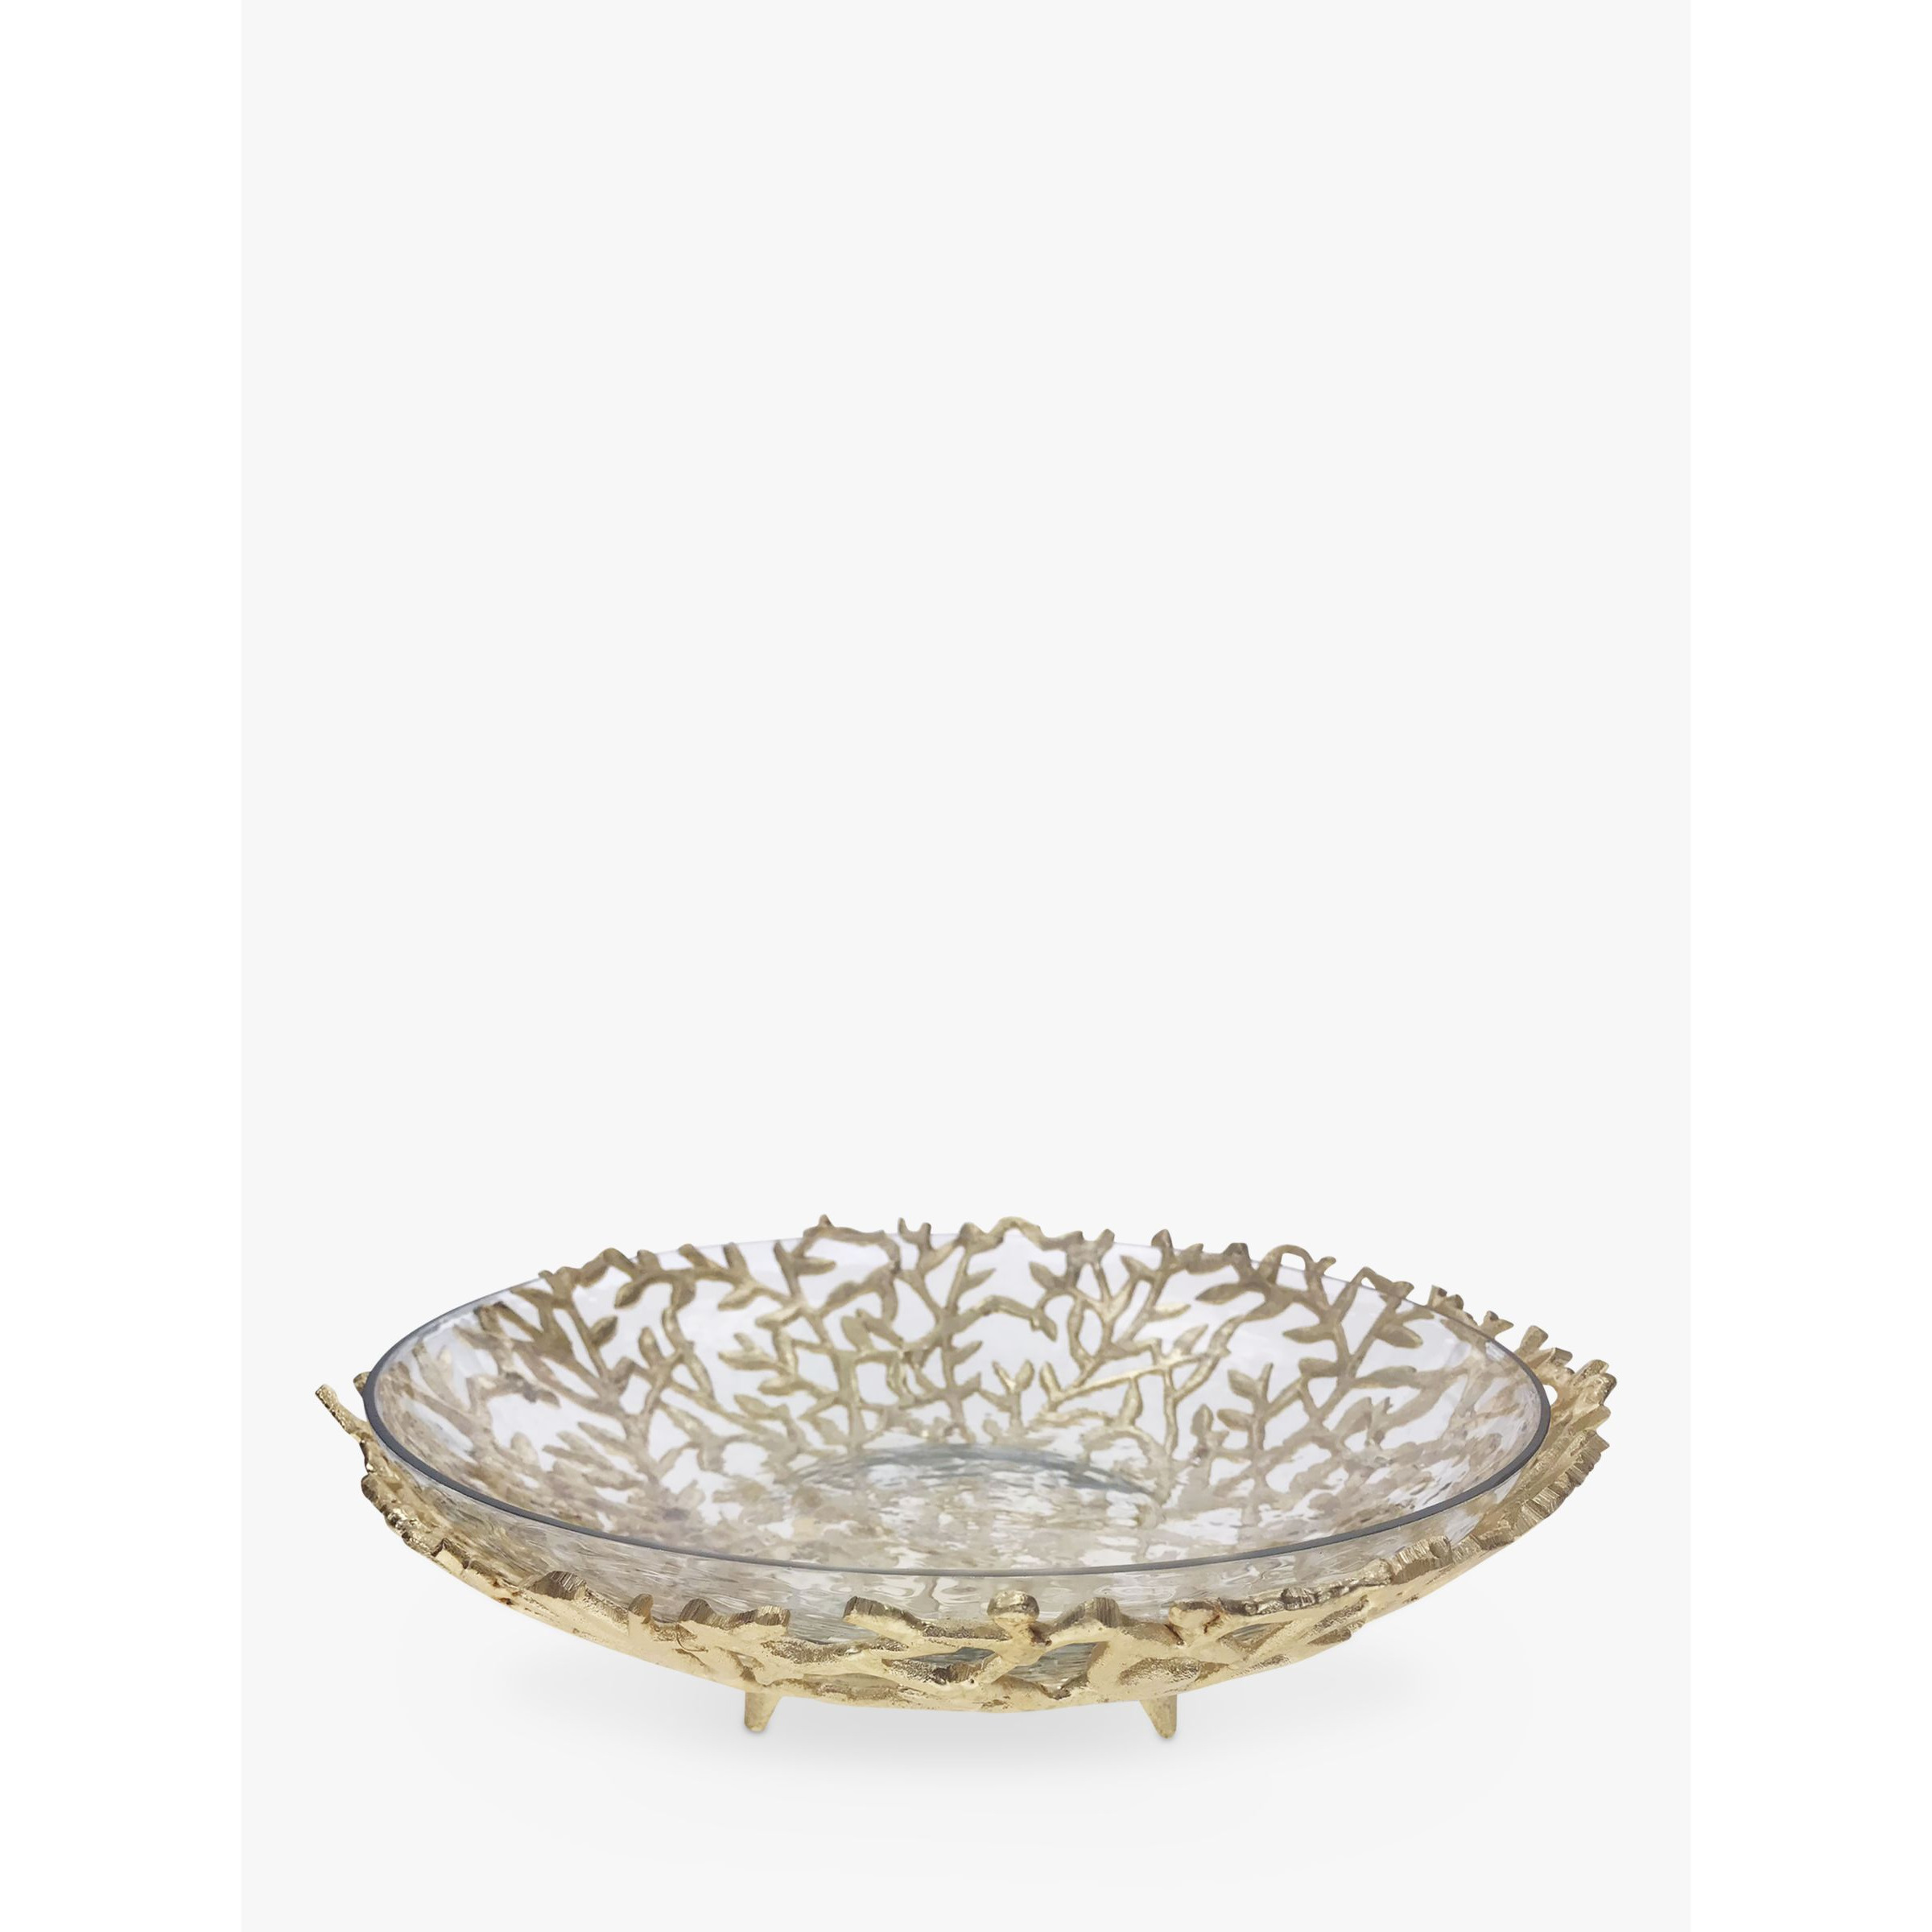 Culinary Concepts Coral Metal Basket & Glass Bowl, 32cm, Gold - image 1